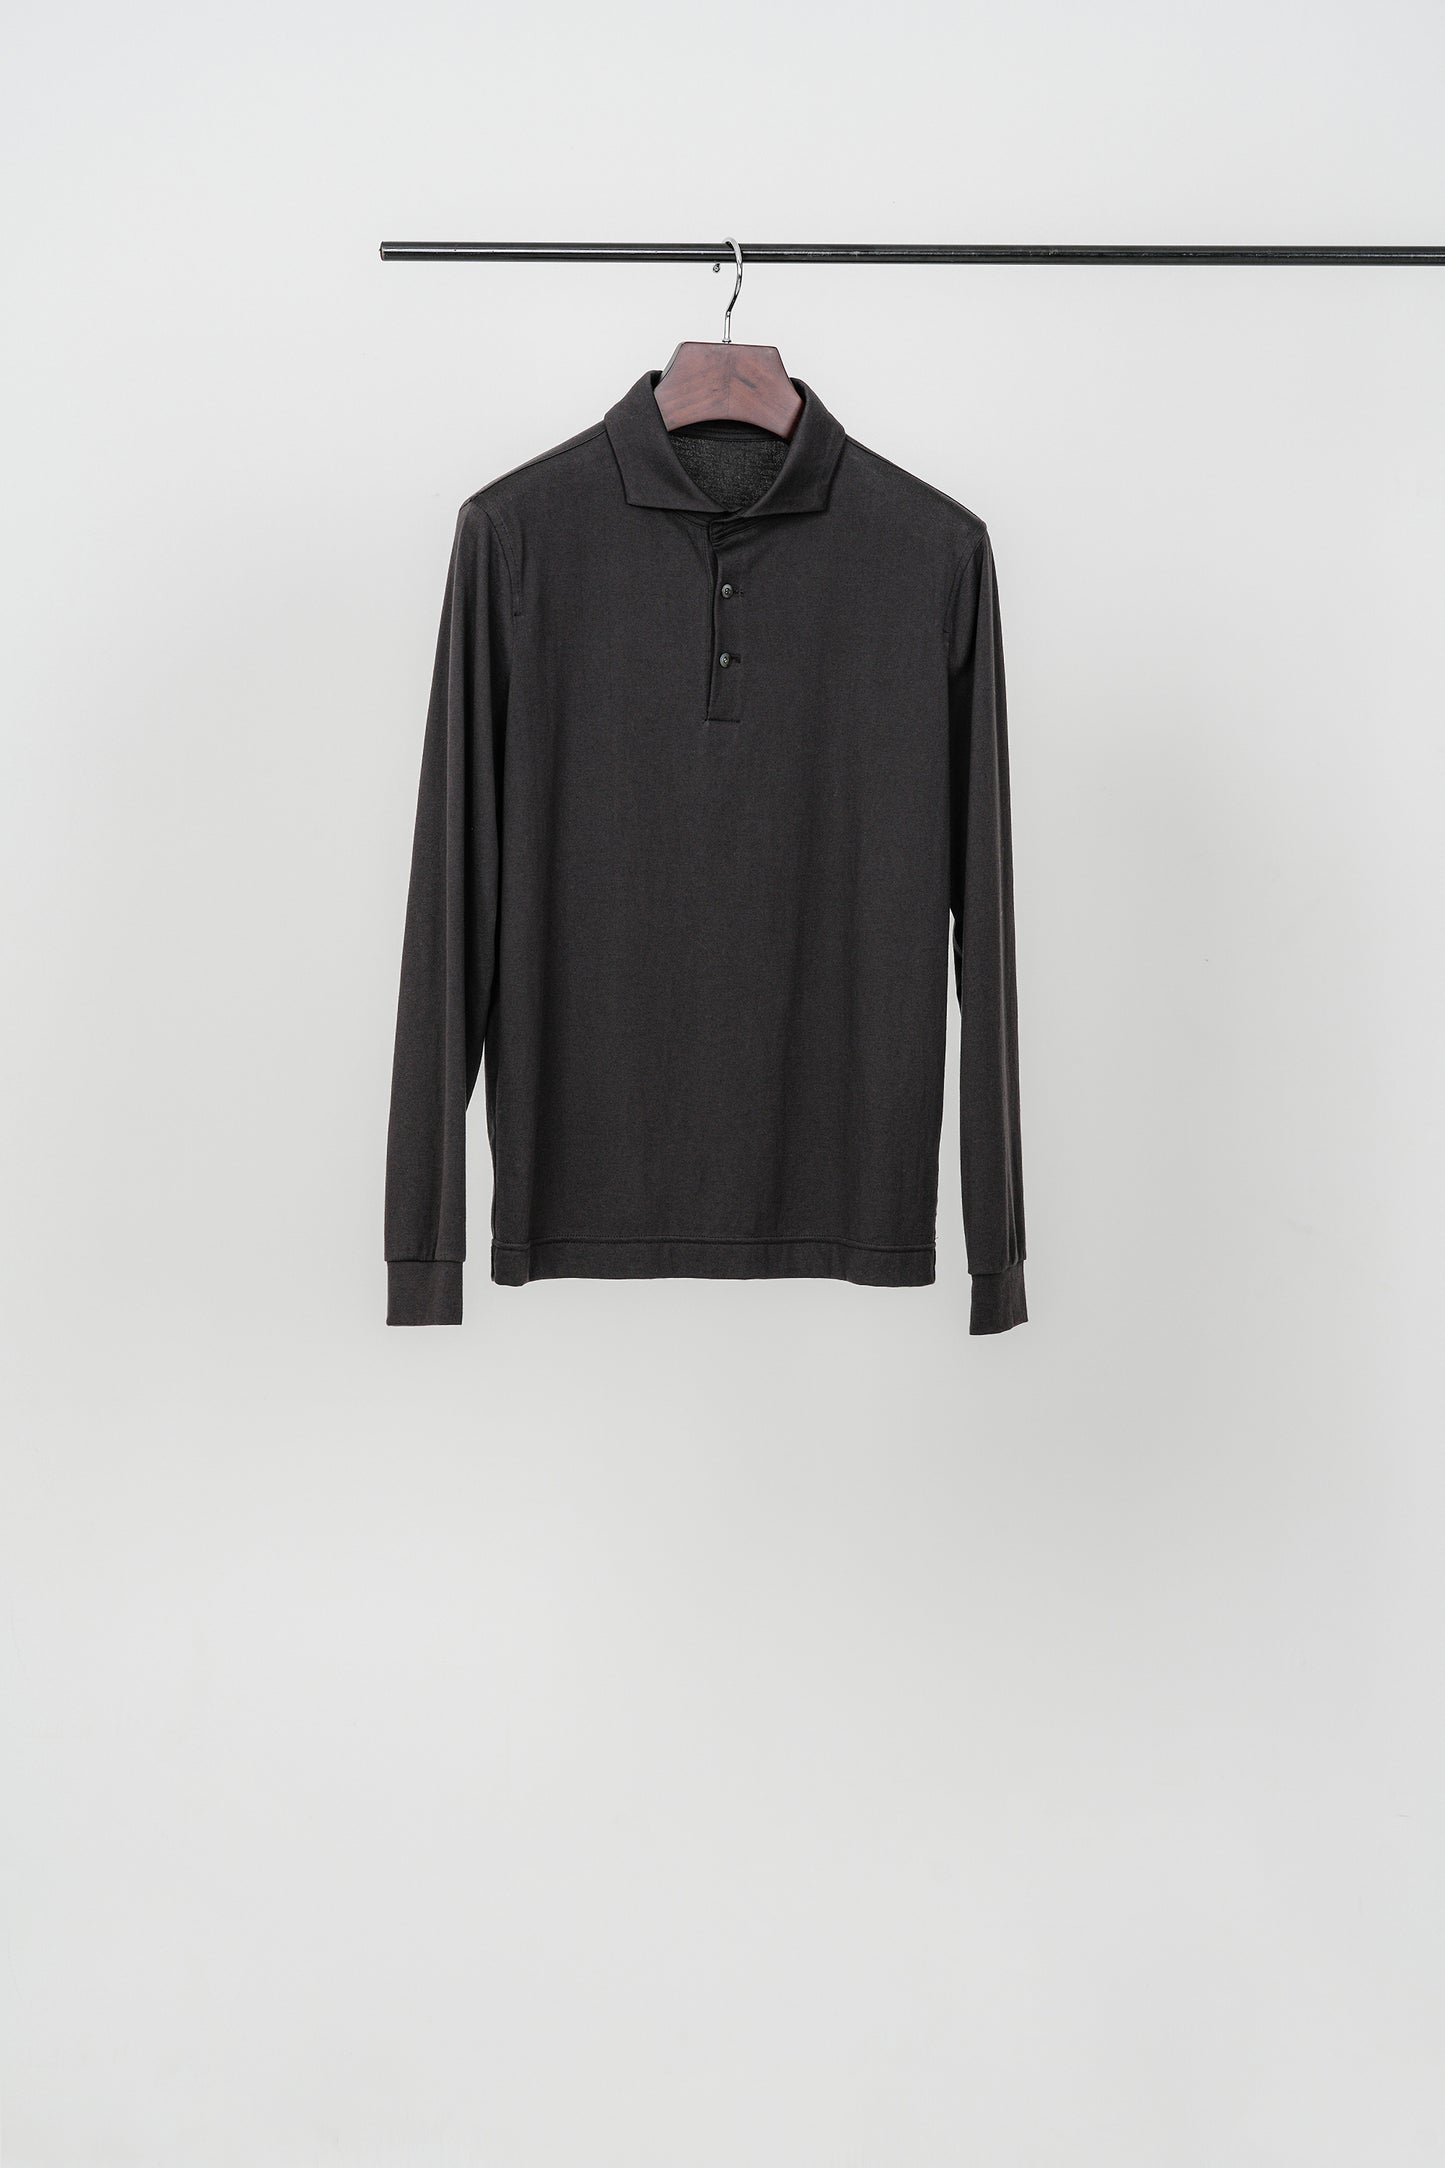 [Reference product] Long-sleeved Y-shirt - SUBIN cotton sheeting